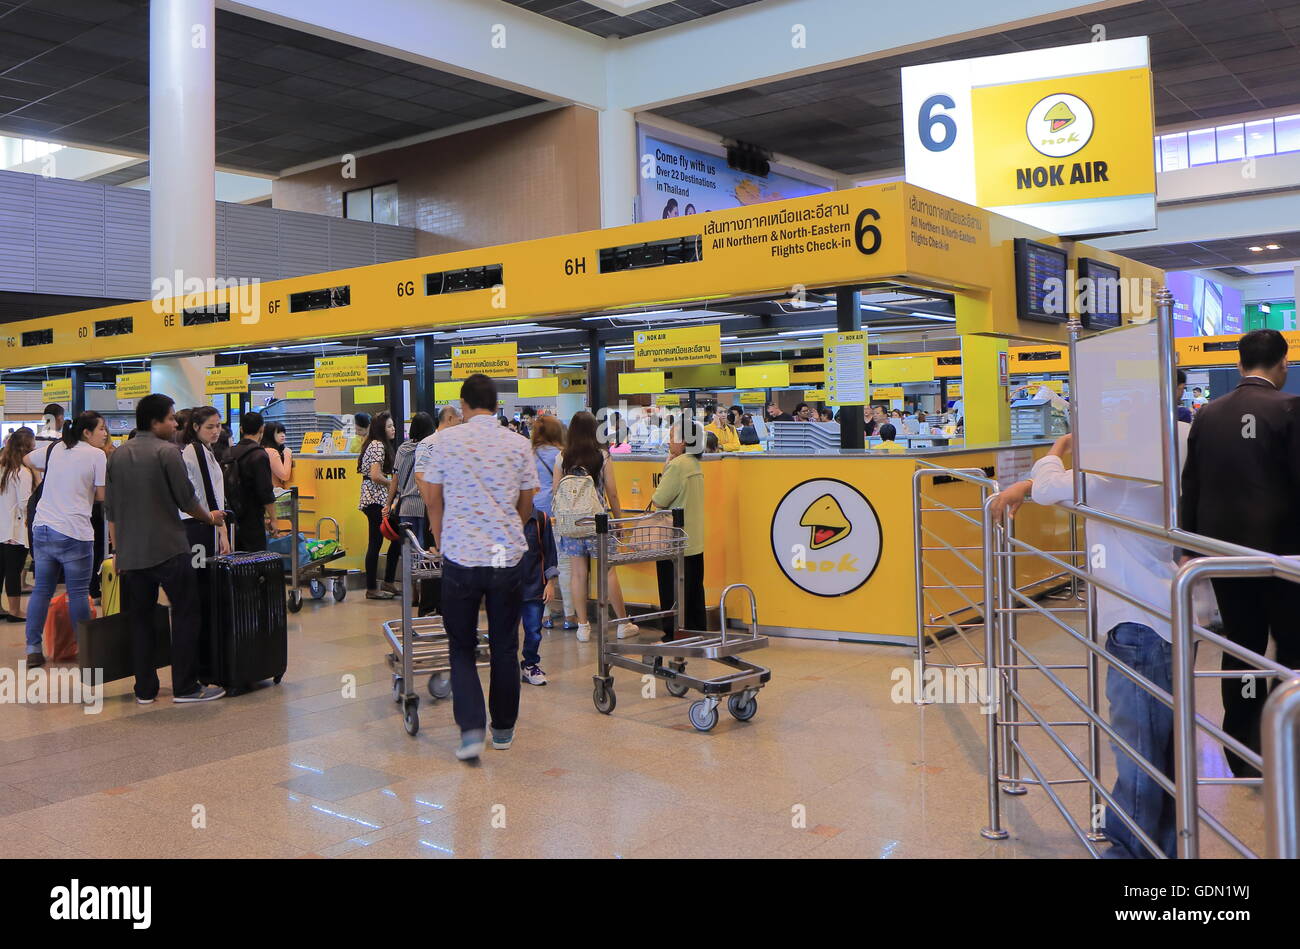 People check in for Nok Air flights at Don Mueang airport in Bangkok Thailand. Stock Photo